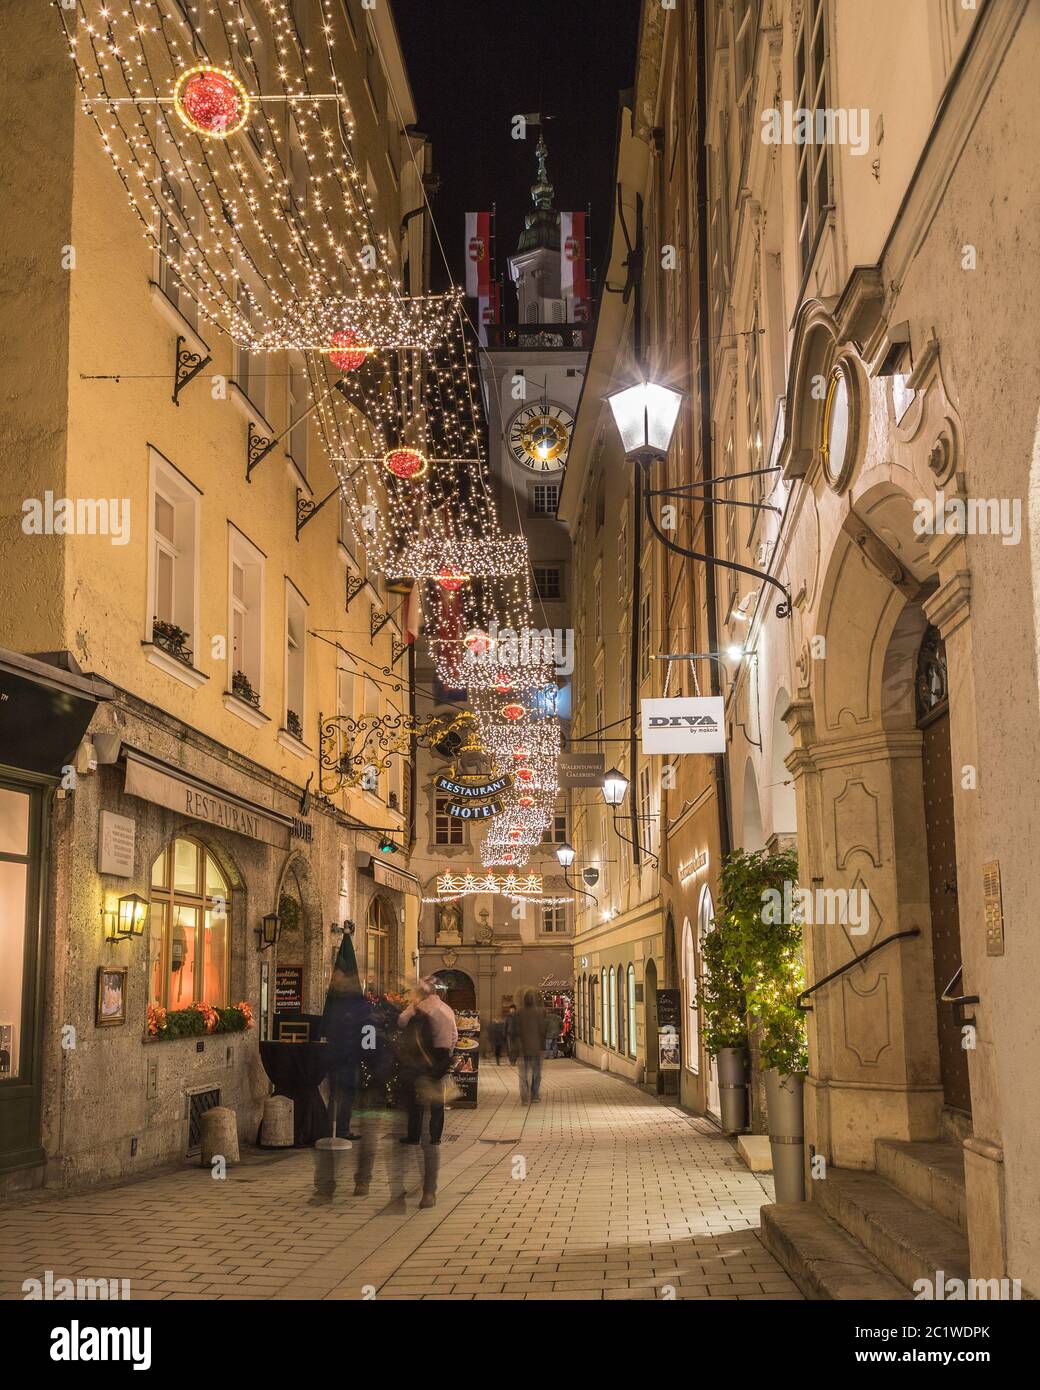 SALBURG, AUSTRIA - 20TH 2017: A view along Sigmund-haffner-gasse in Salzburg night during the Christmas season. Decorations, people, shops Stock Alamy